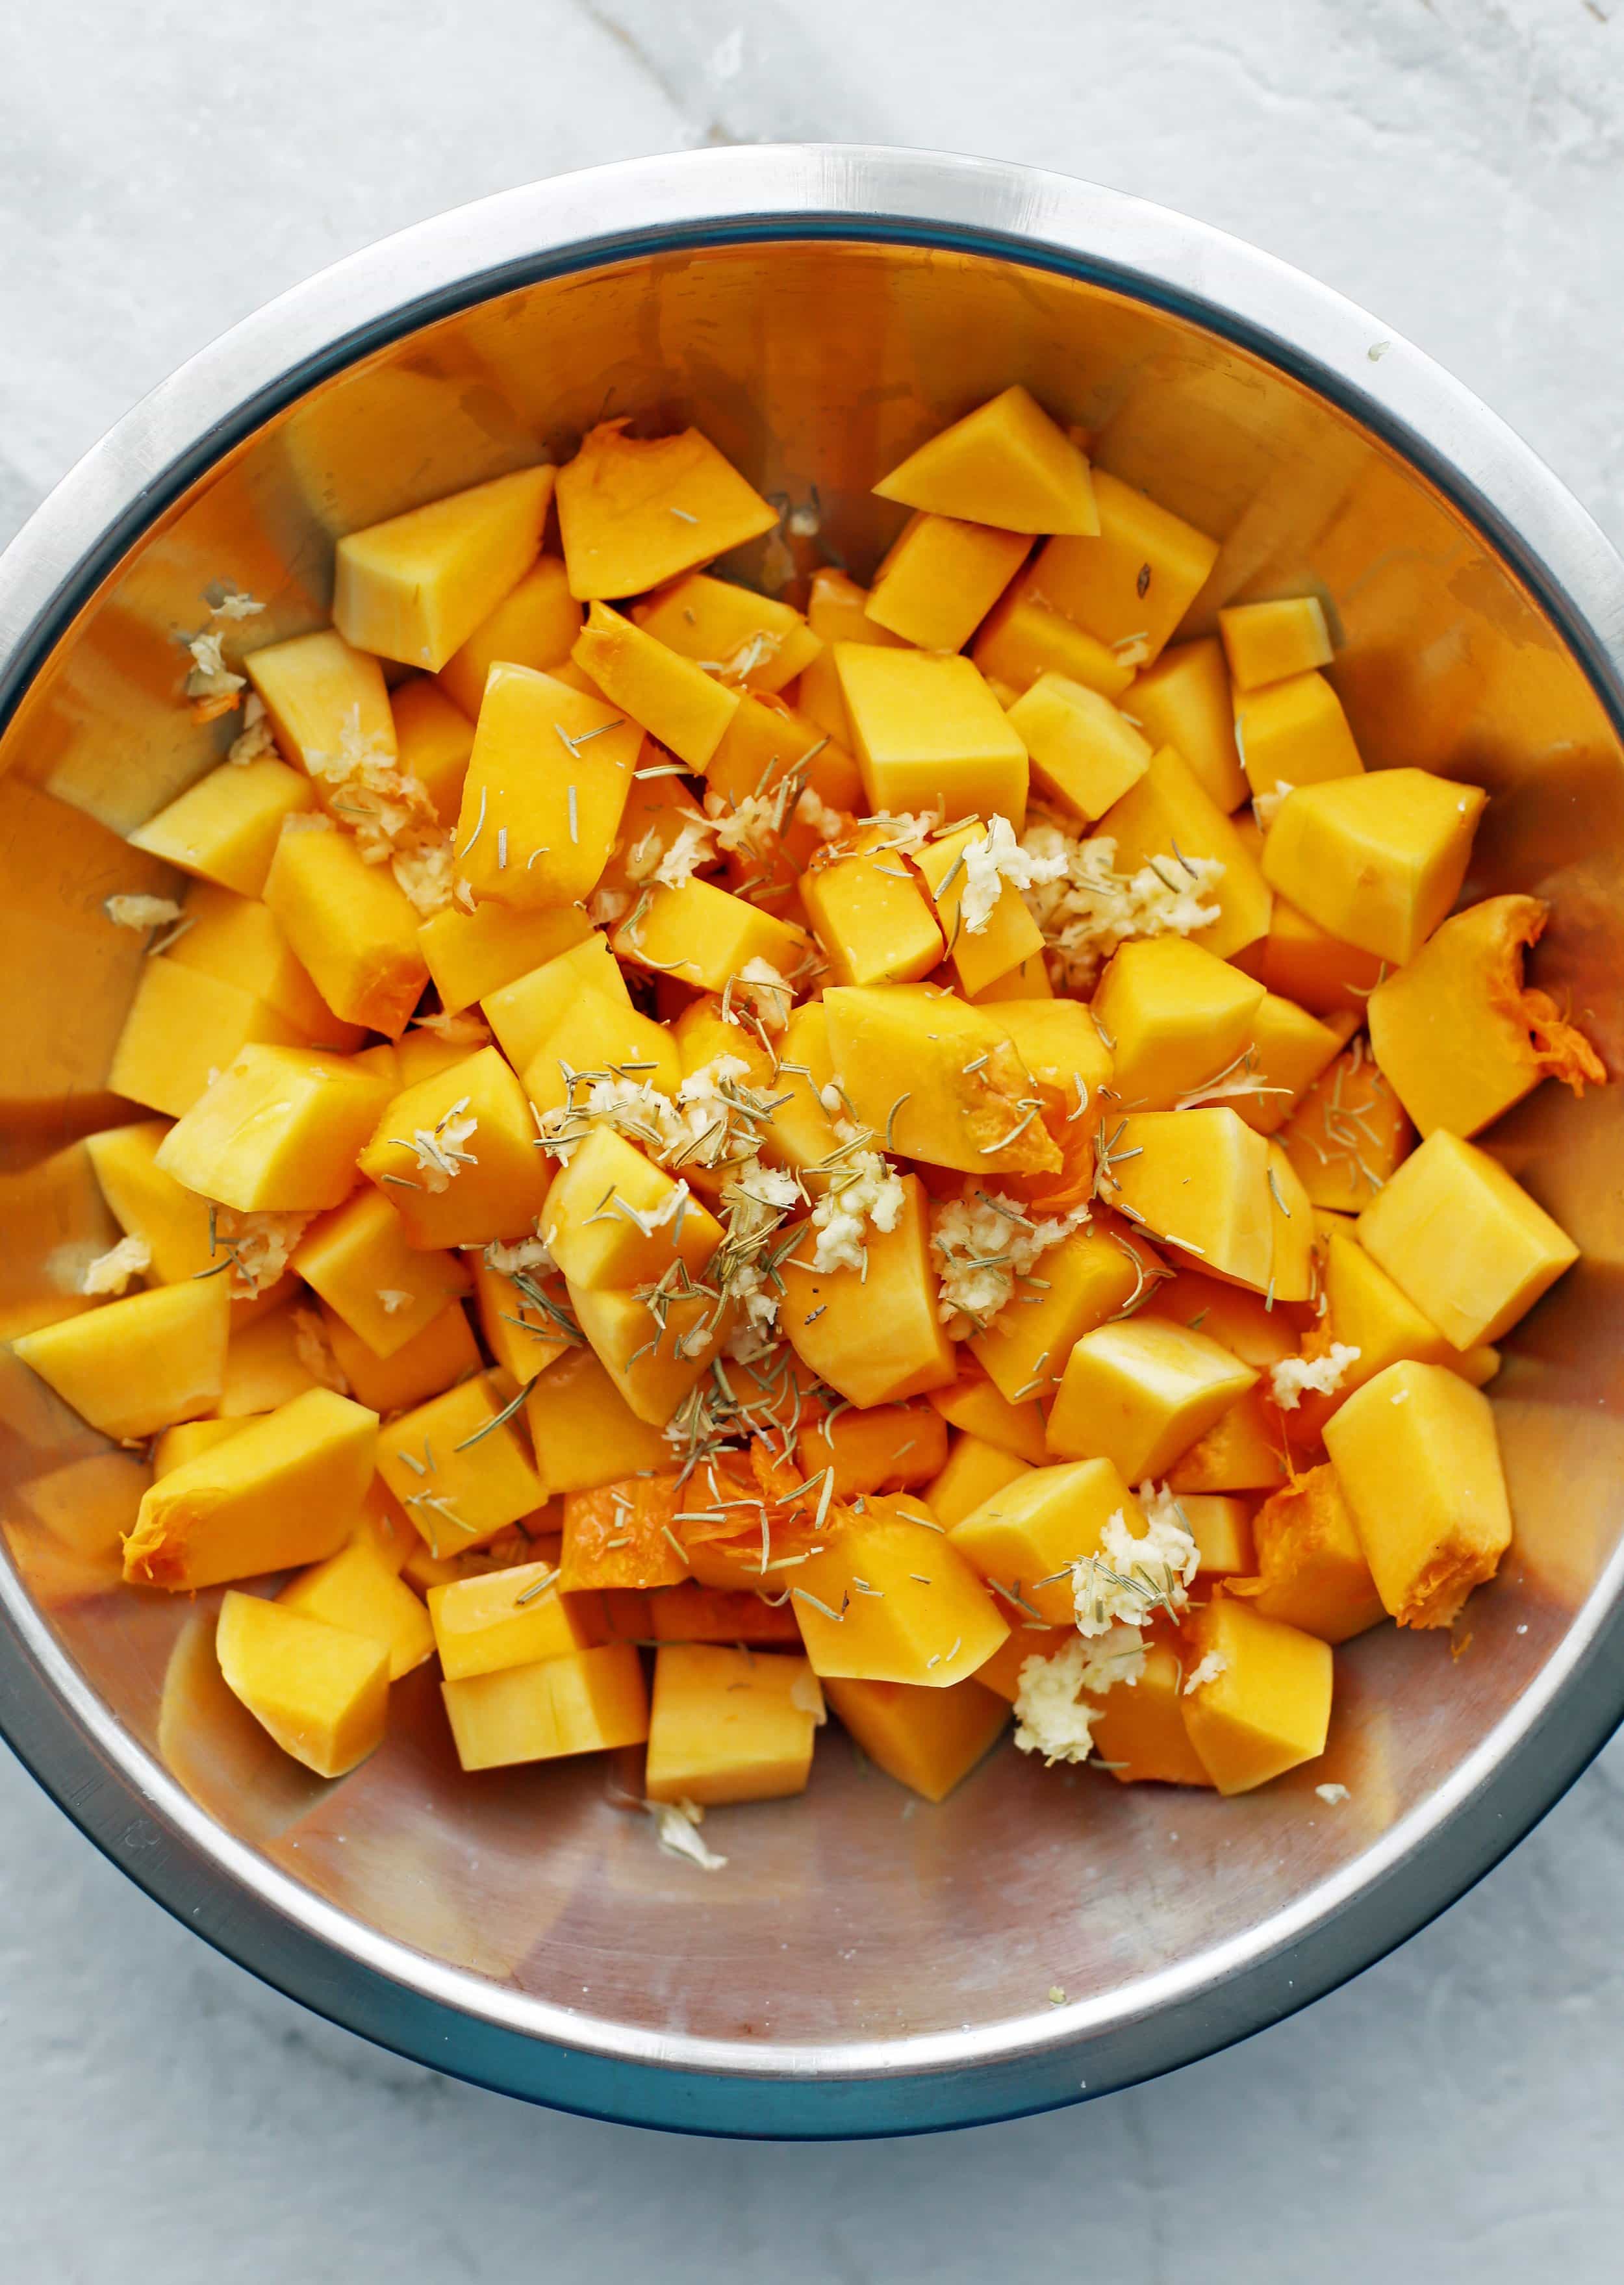 A metal bowl containing chopped butternut squash, garlic, herbs, and olive oil.